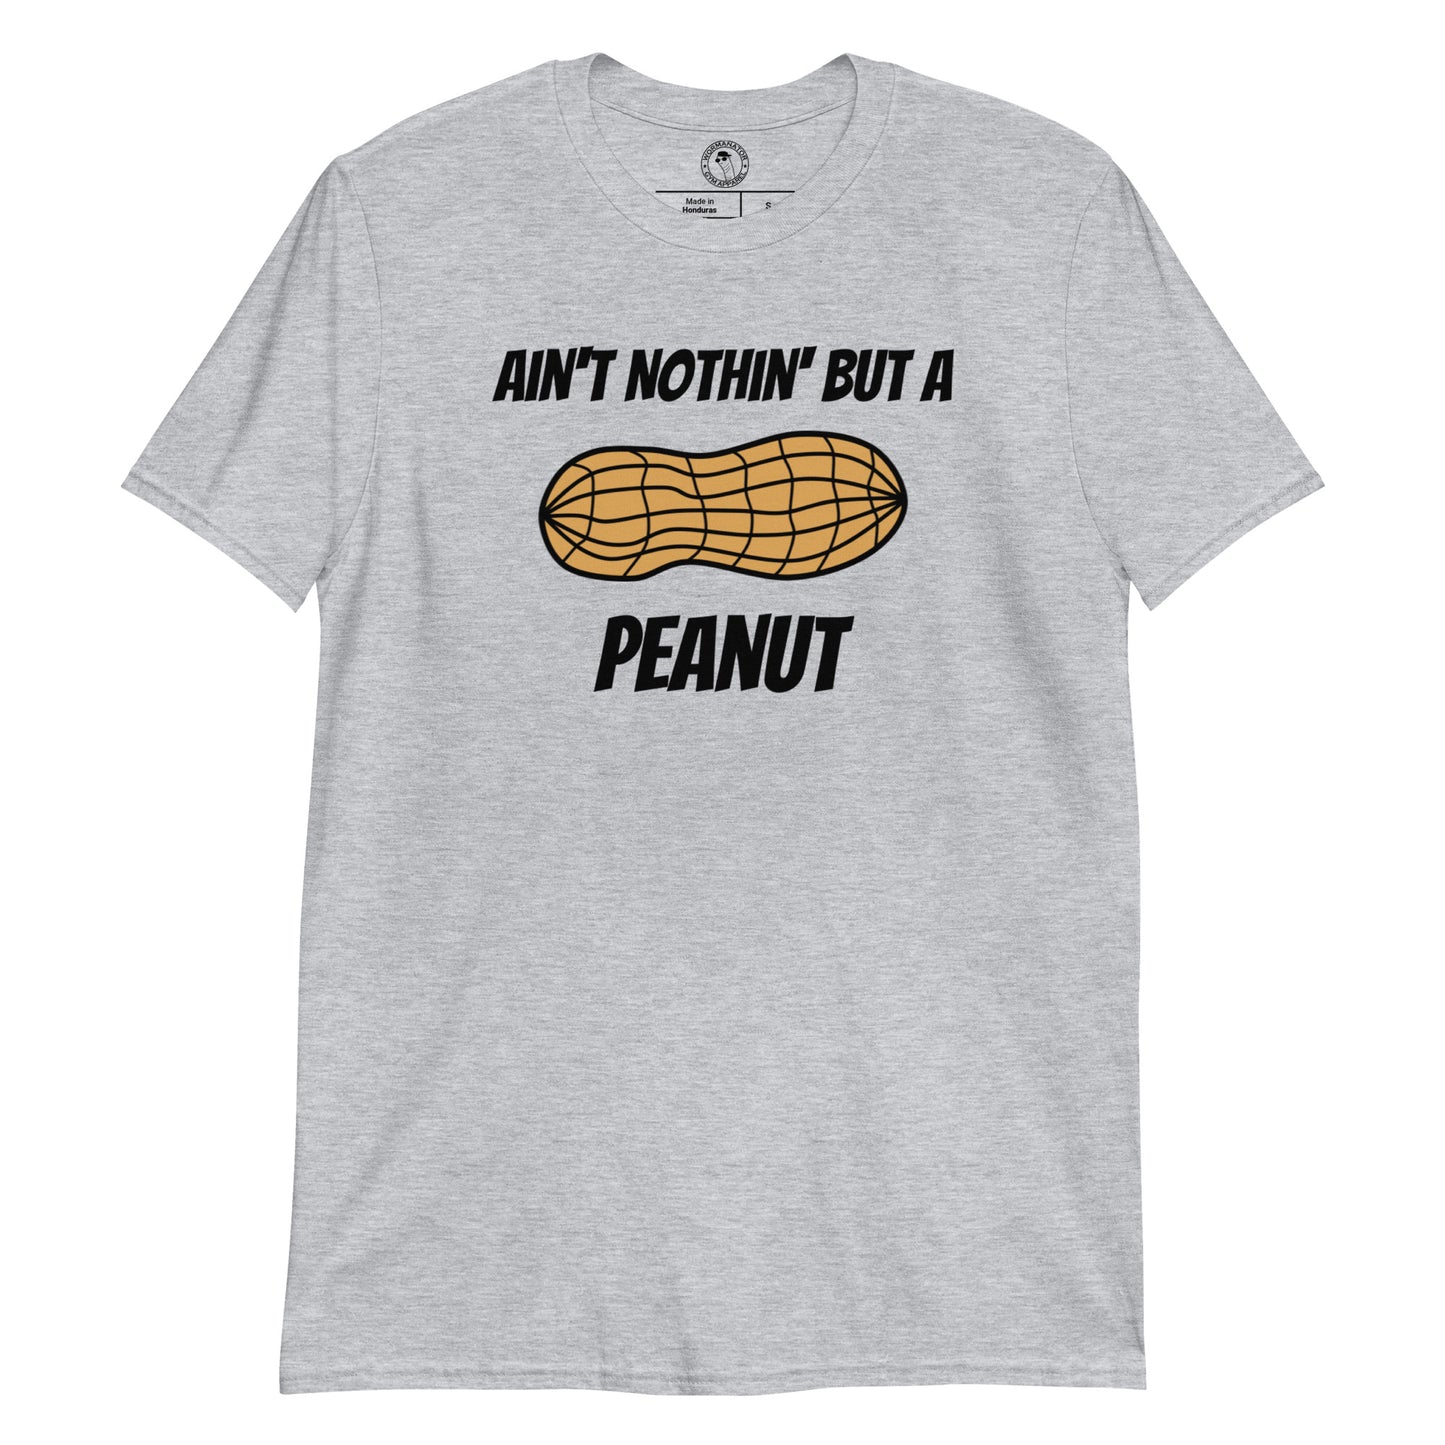 Ain't Nothin' but a Peanut Shirt in Sport Grey